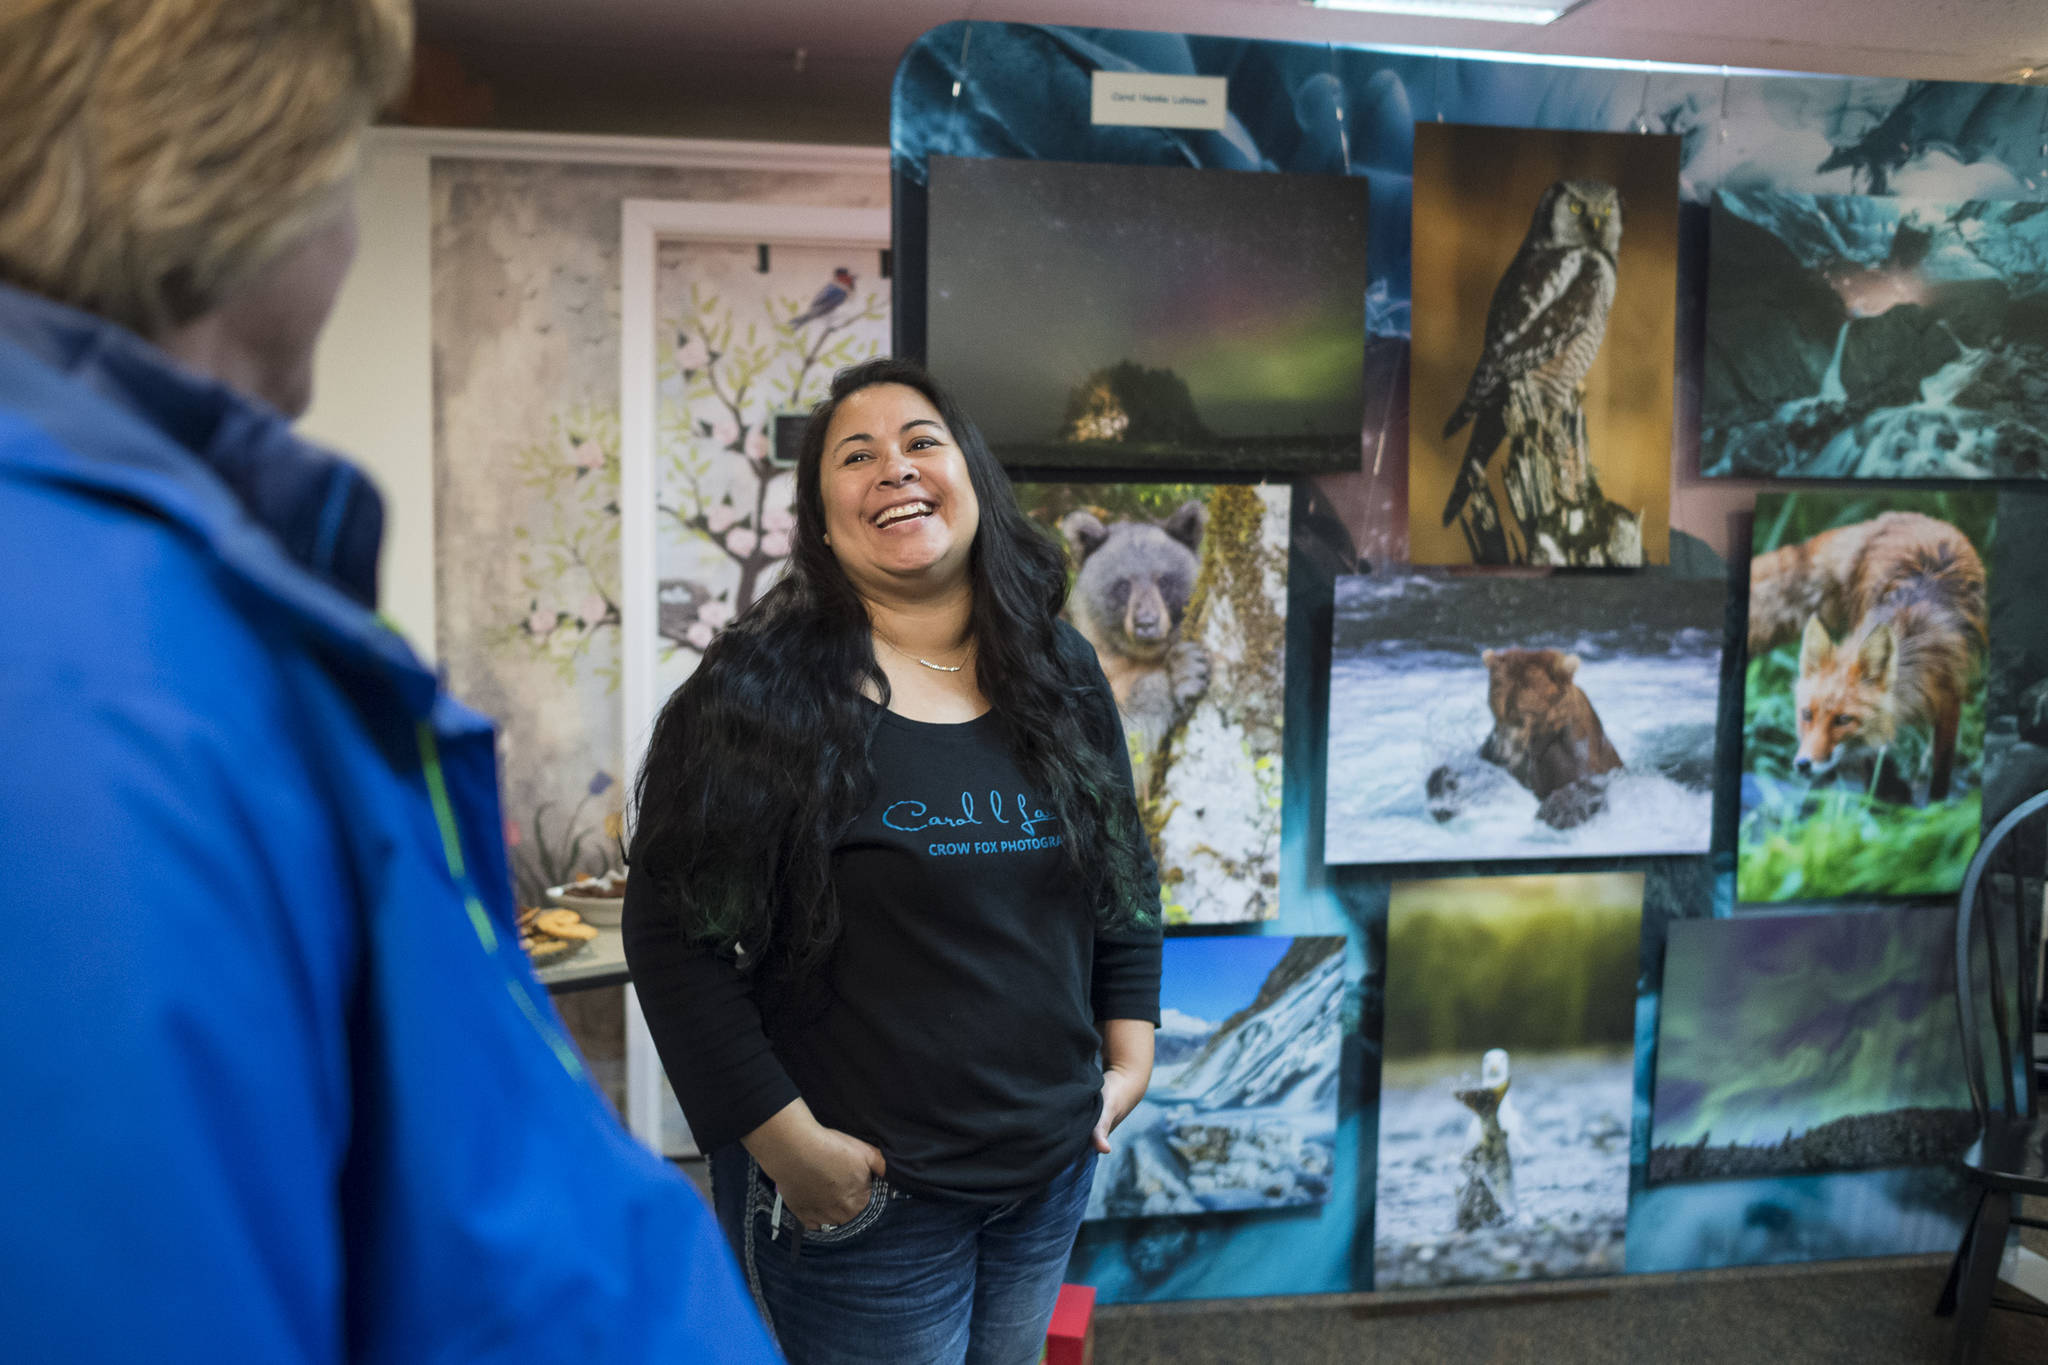 Carol Henke Lahnum, owner of Crow Fox Photography, visits with Matt Brown during Gallery Walk on Friday, Dec. 7, 2018. Henke Lahnum is part of “The Fearless Female Fotographers: Group Photography Exhibit” for Gallery Walk. (Michael Penn | Juneau Empire)